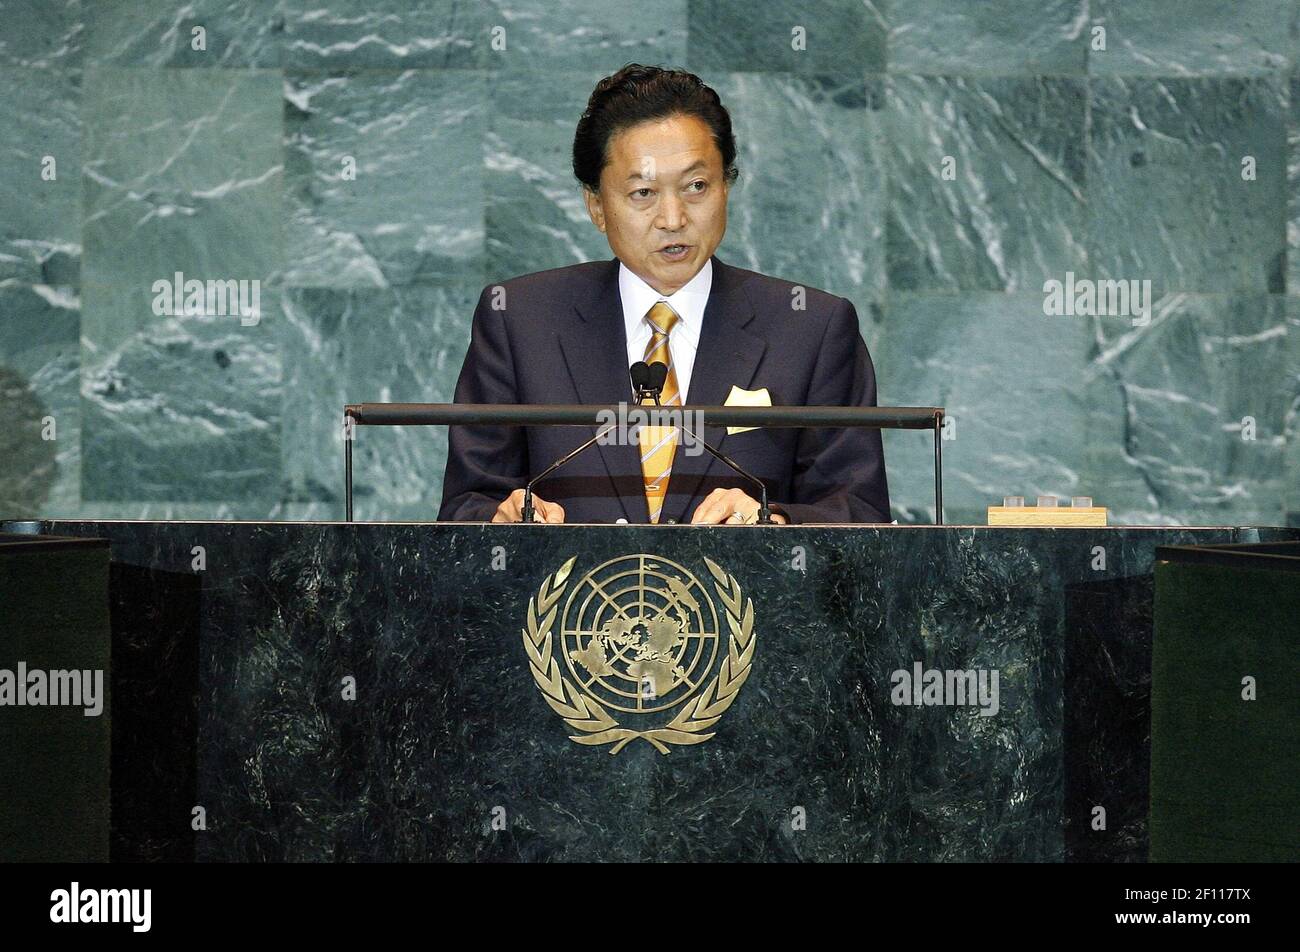 22 September 2009 - New York, NY - Yukio Hatoyama, Prime Minister of Japan, addresses the opening plenary session of the Summit on Climate Change. Convened by Secretary-General Ban Ki-moon, the Summit aims at mobilizing the highest level political will needed to reach a fair, effective, and scientifically ambitious global climate deal at the United Nations Climate Change Conference in Copenhagen this December. Photo Credit: Marco Castro/UN Photo/Sipa Press /0909221857 Stock Photo